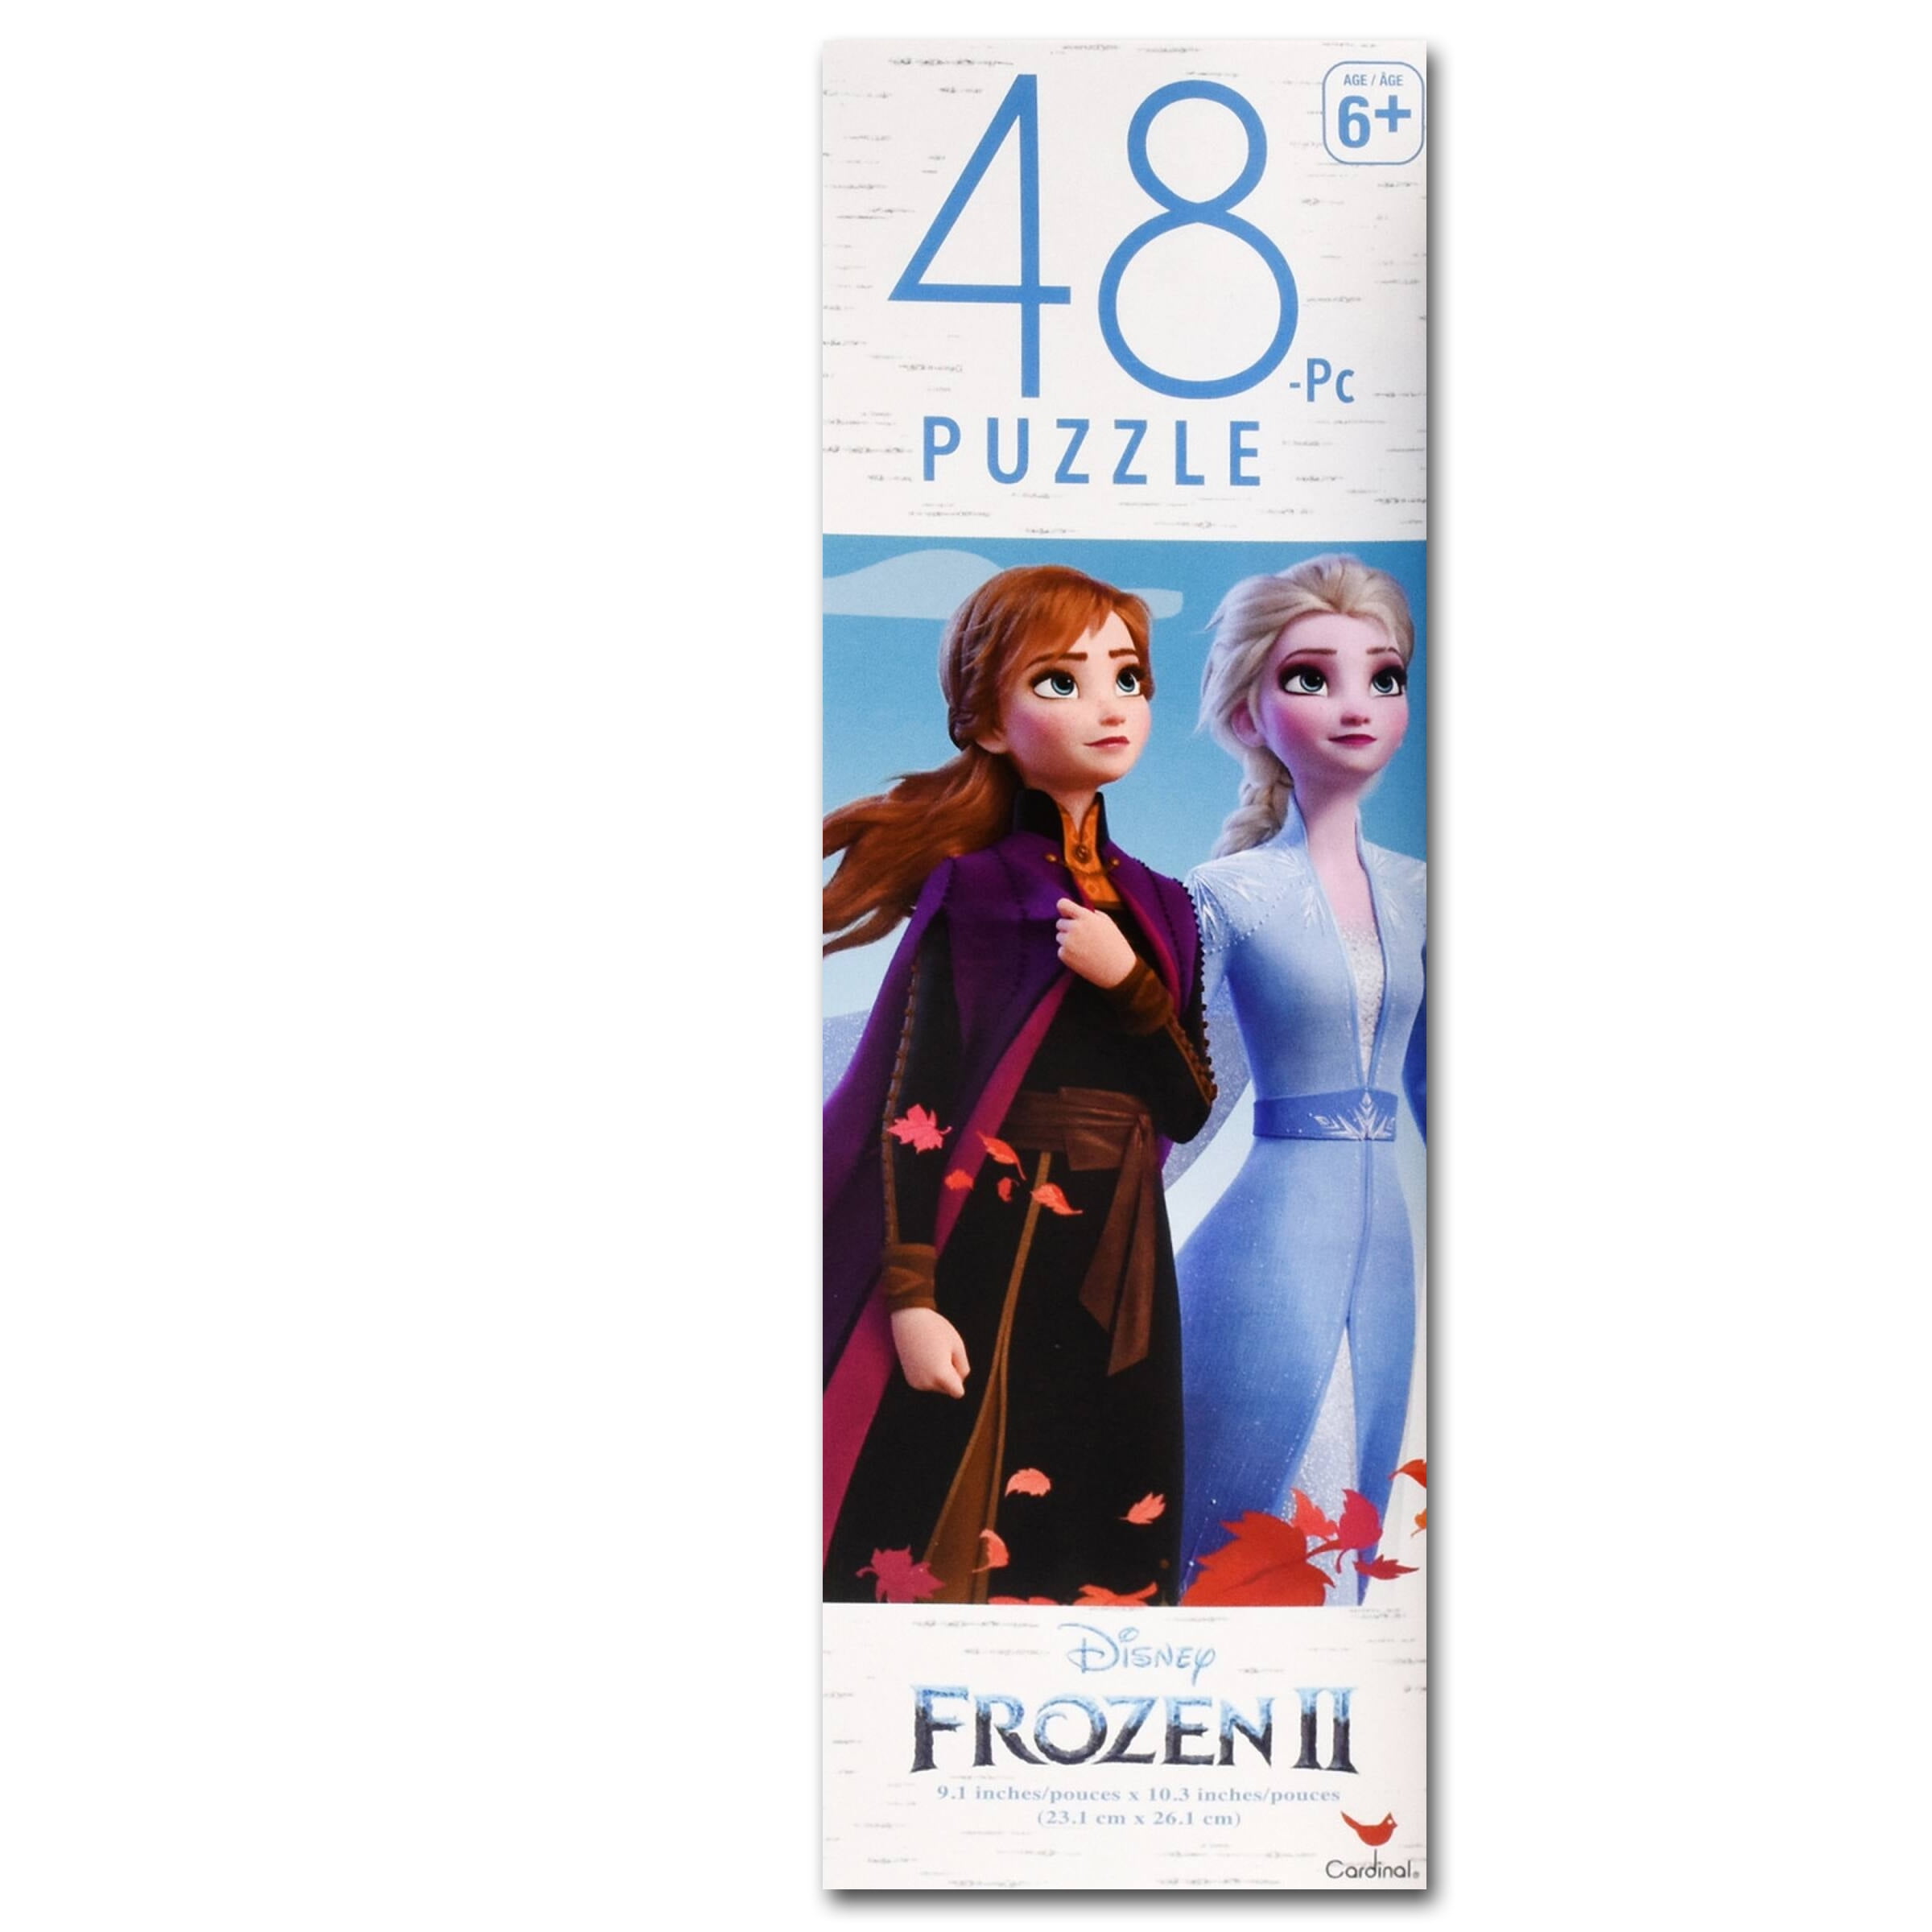 Frozen II Olaf Snowman Shaped Puzzle 48 piece Size 9.1"x10.3" New 